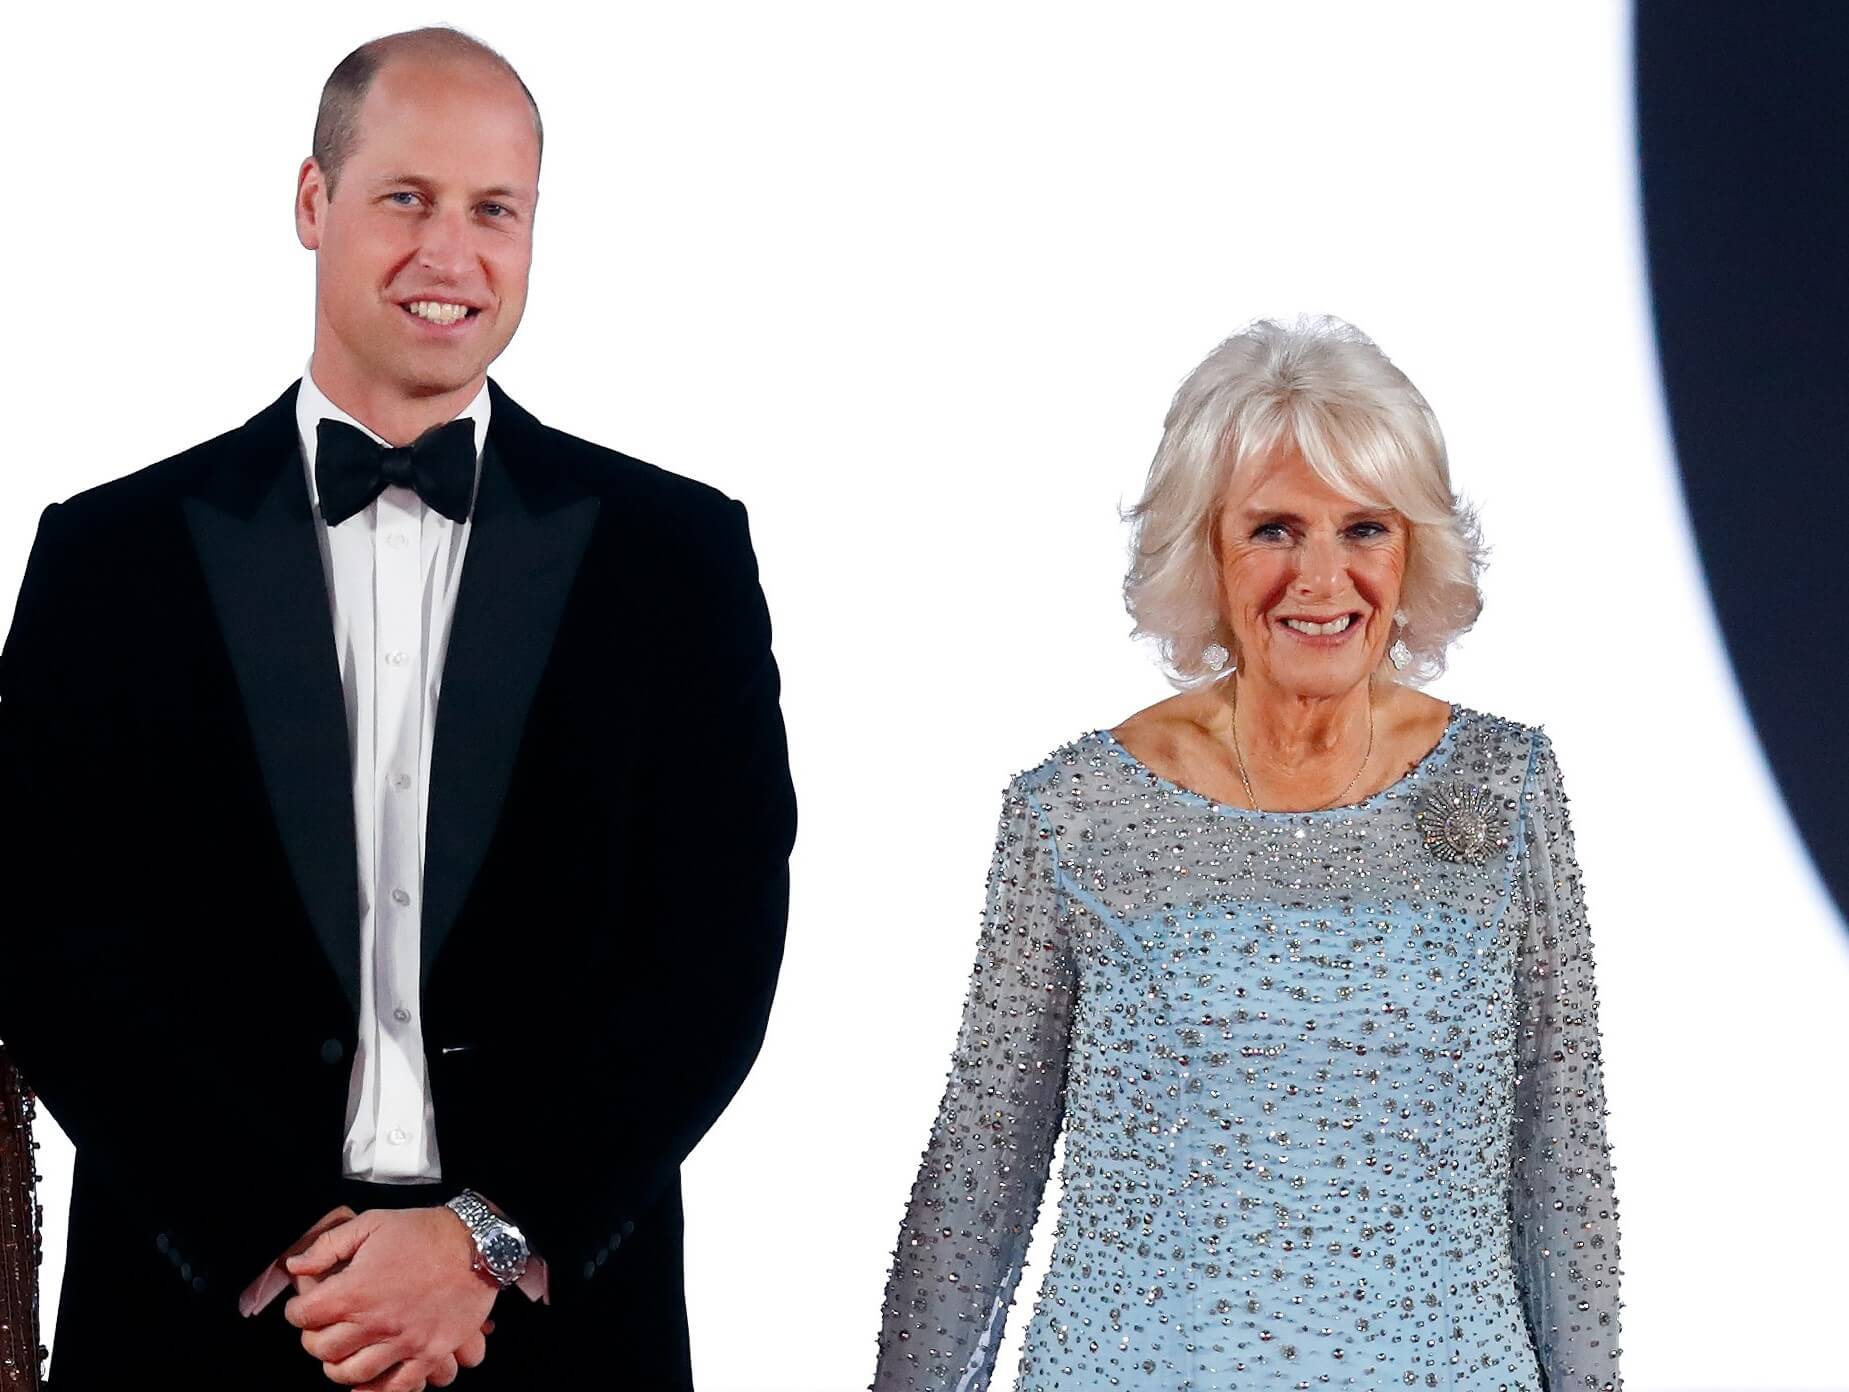 Prince William and now-Queen Camilla attend the 'No Time To Die' world premiere in London